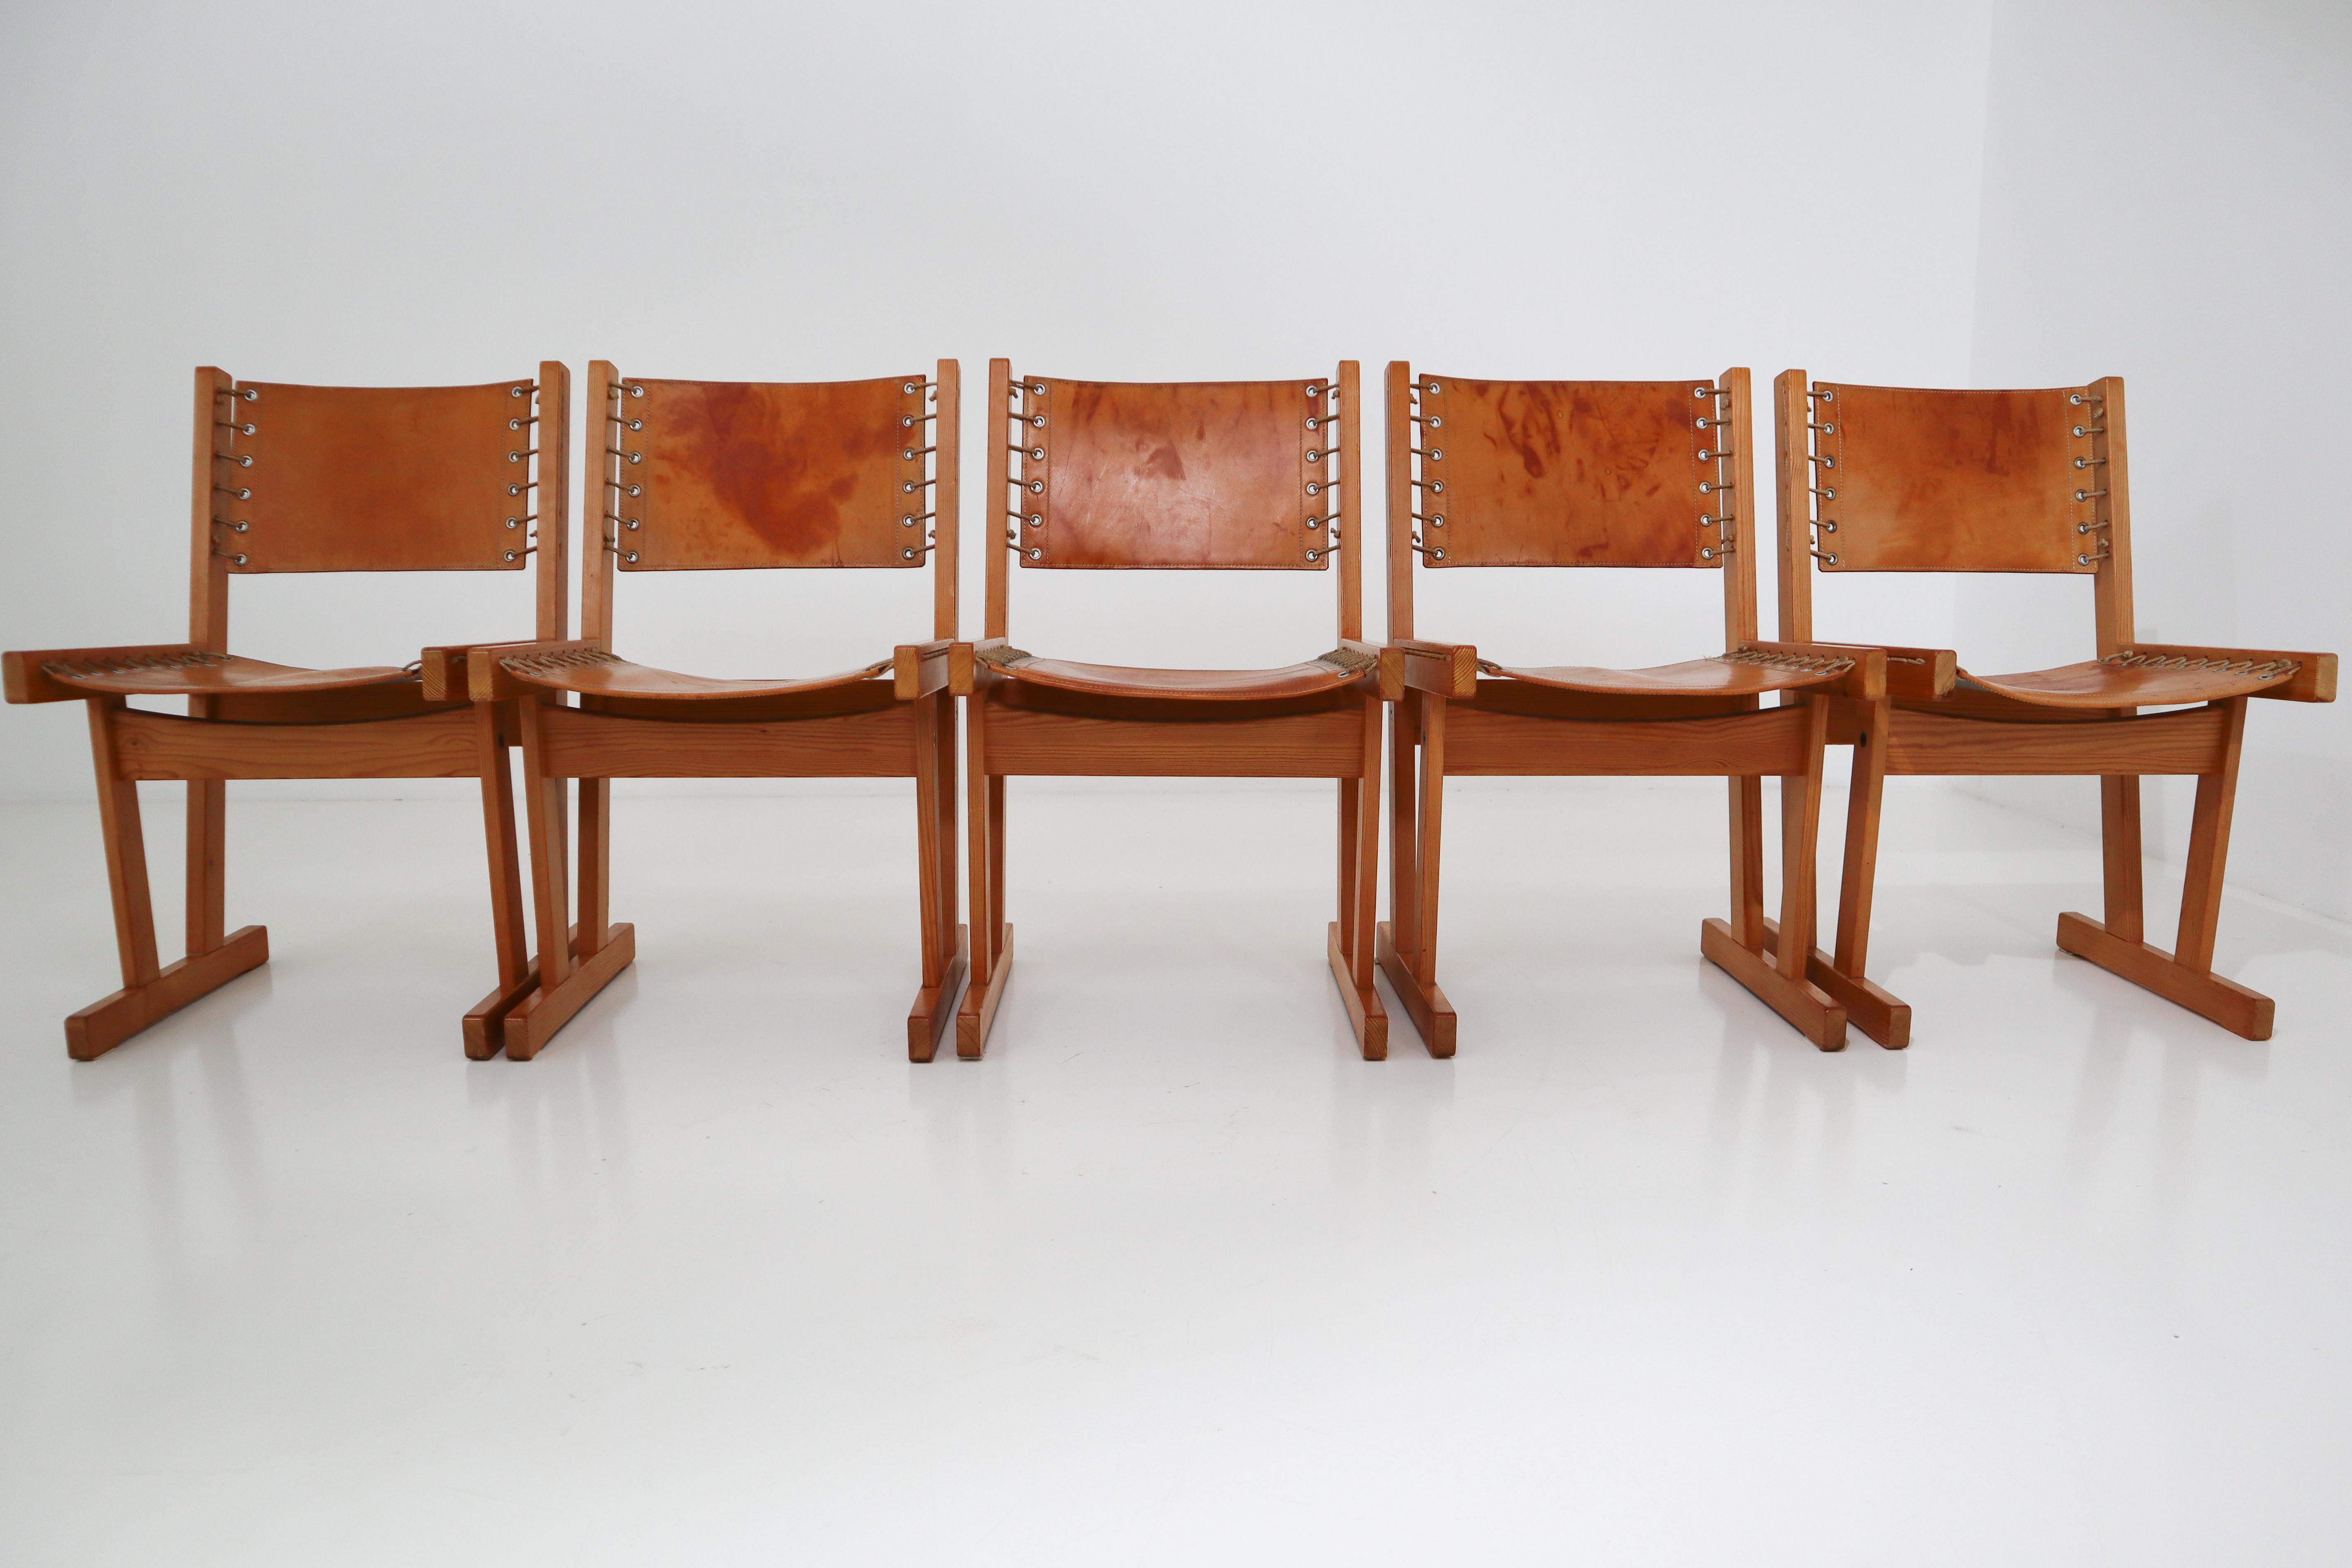 Midcentury Safari Chairs in Thick Cognac Saddle Leather and Solid Pine Wood 1